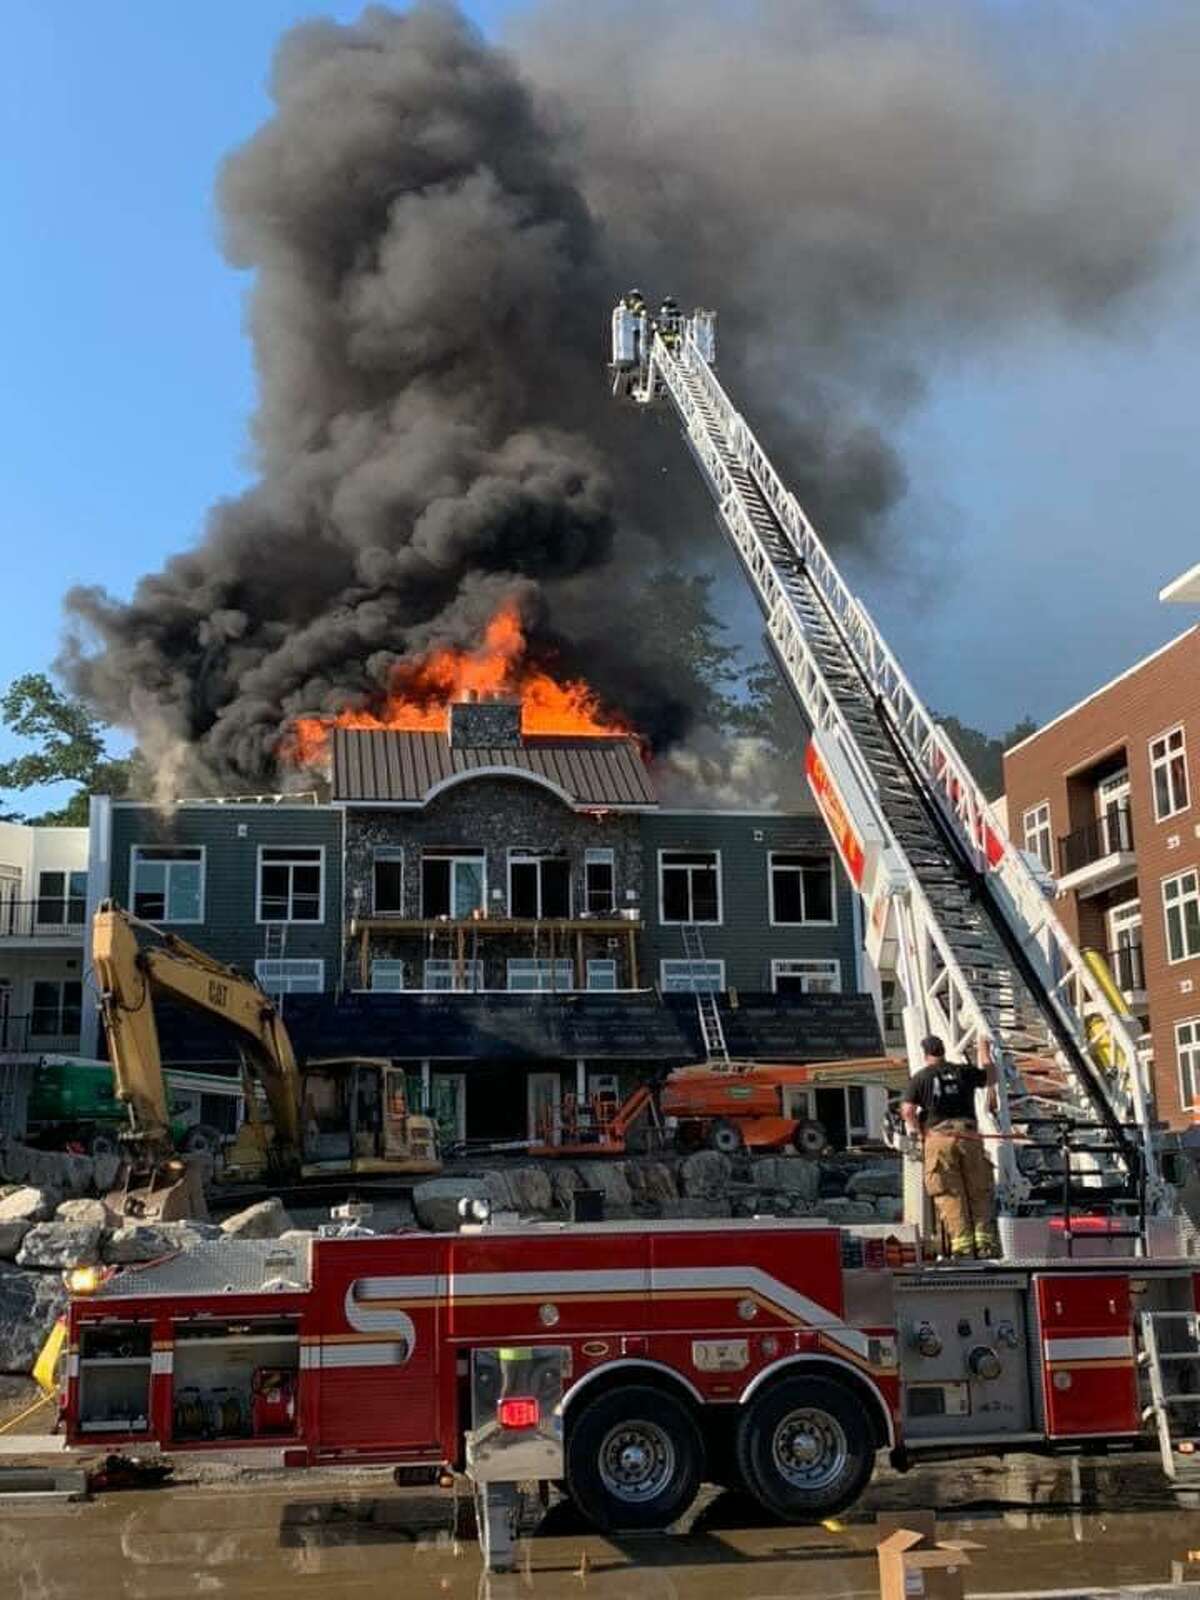 Units on scene at a fire in Oxford, Conn., on Monday, July 27, 2020.